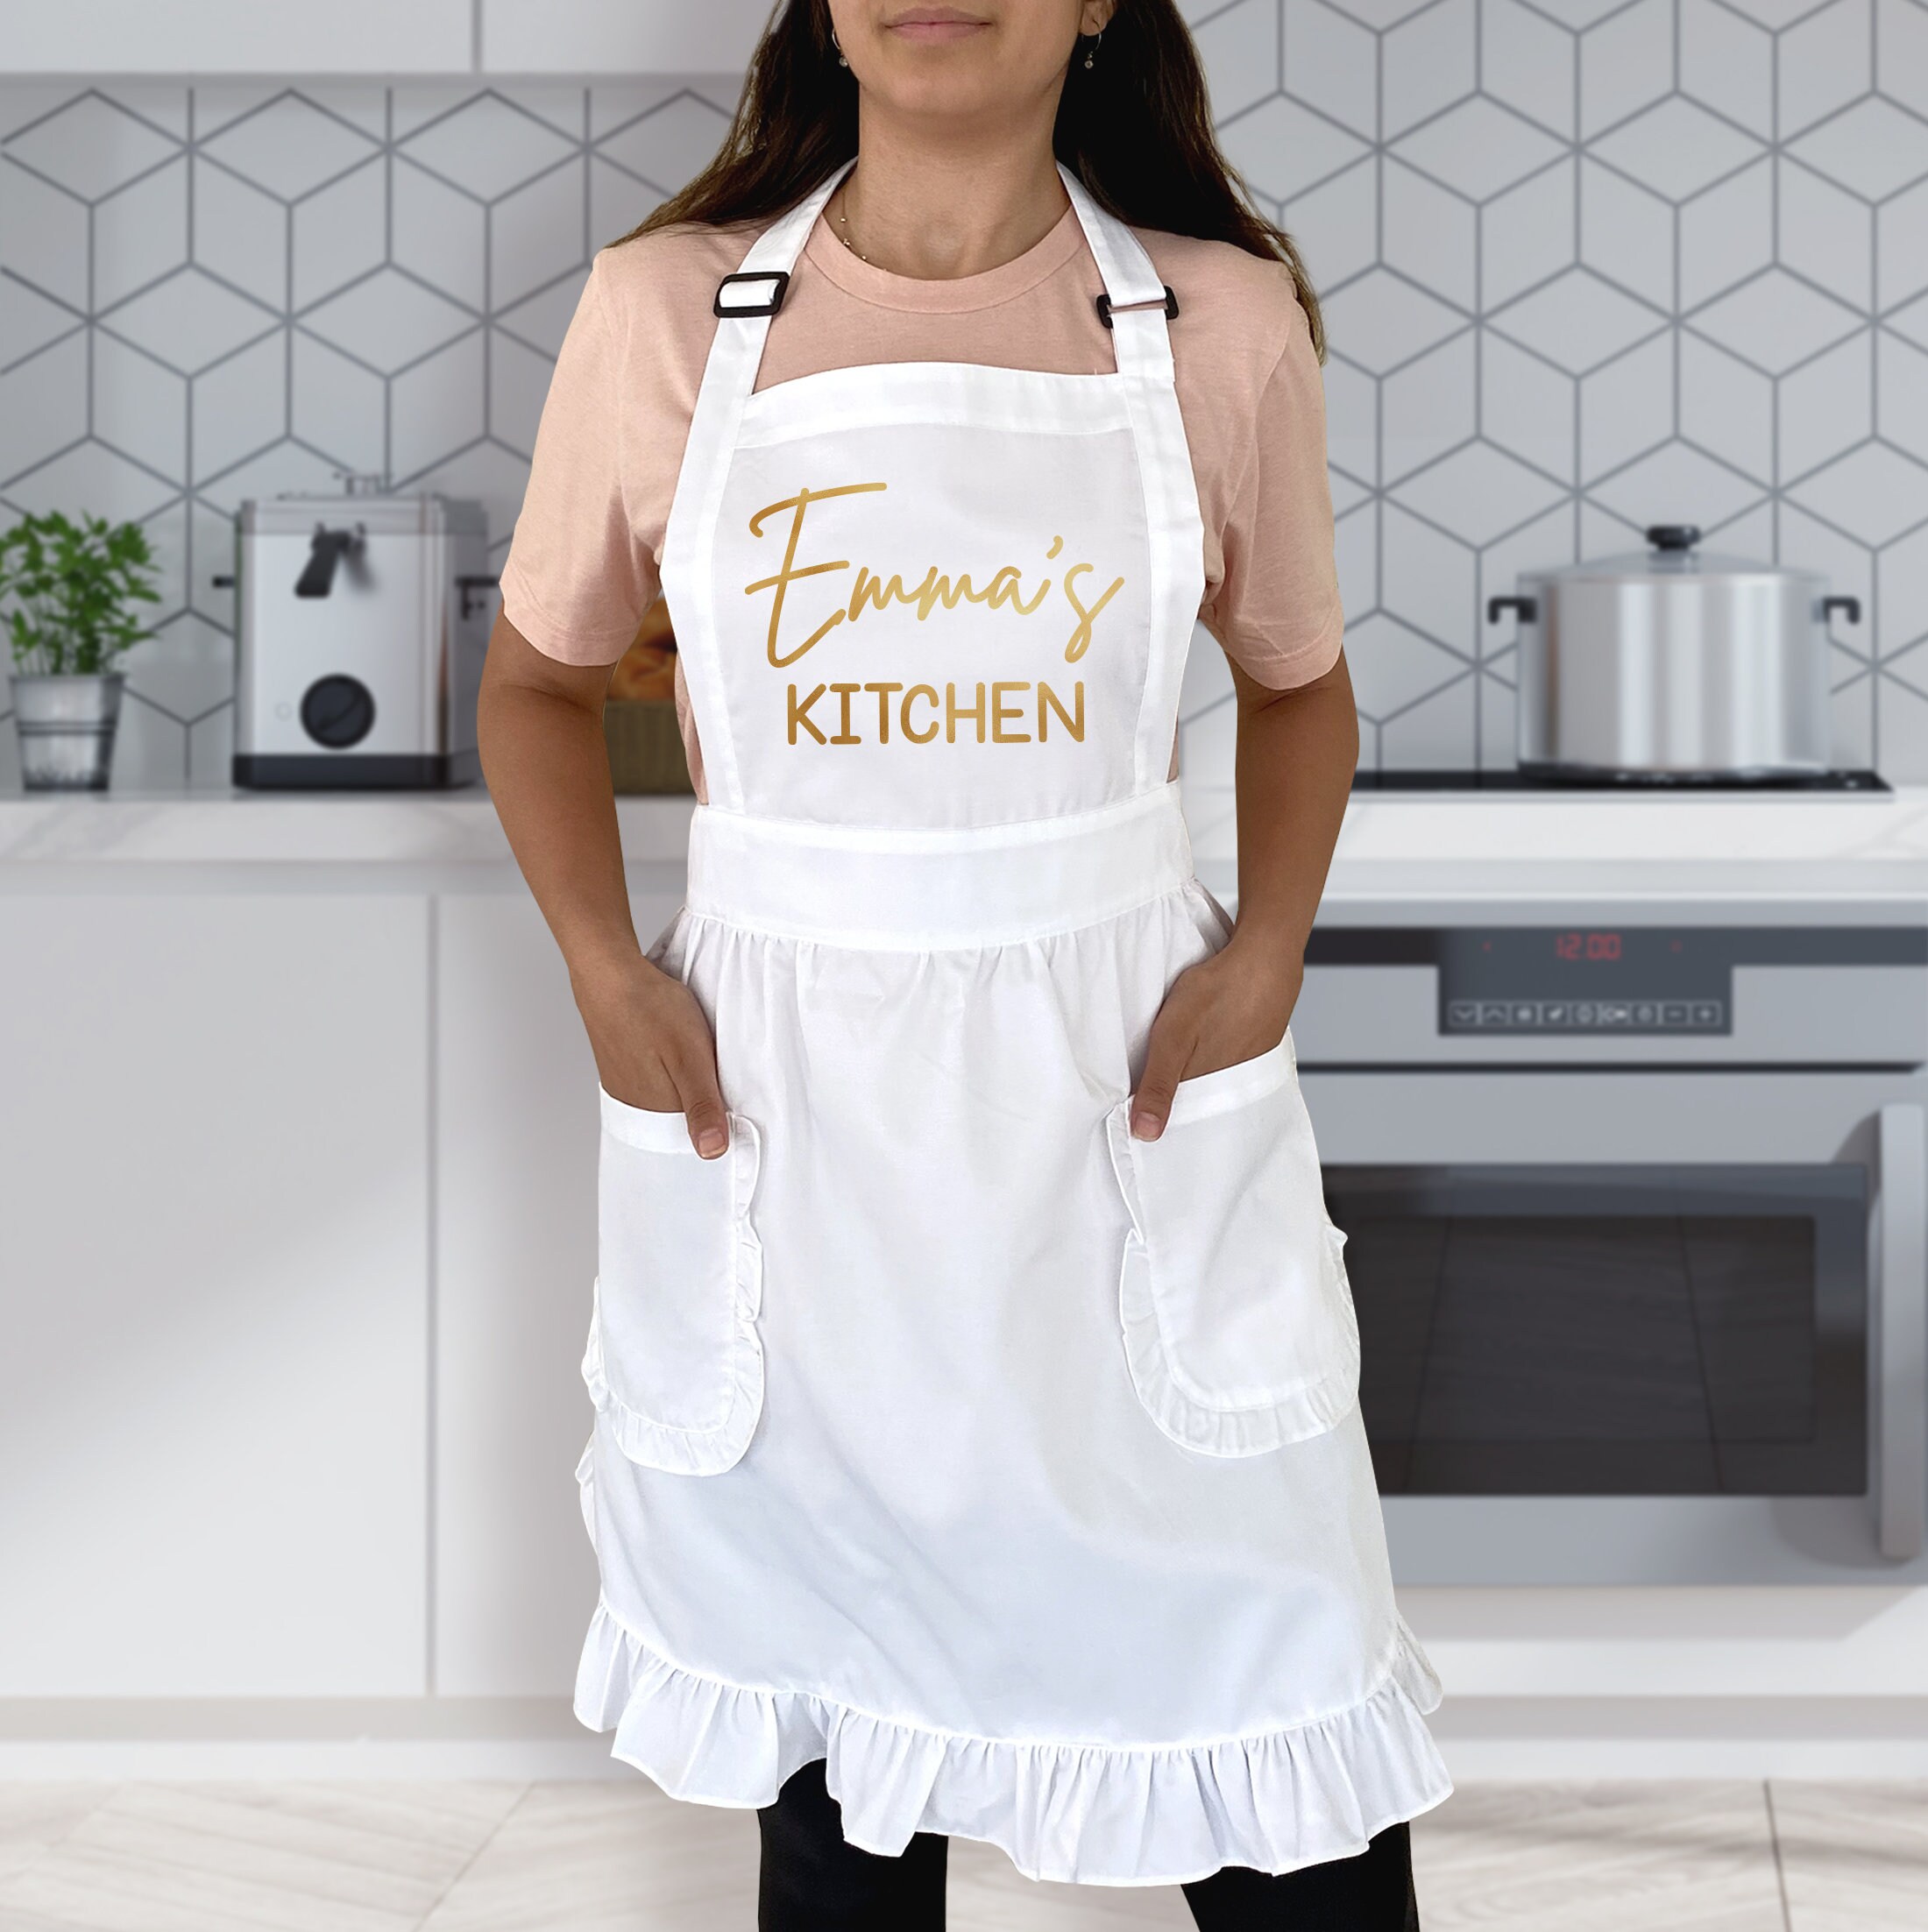 Best Mom Ever. Embroidered Apron (white) – The Girly Clergy Girl